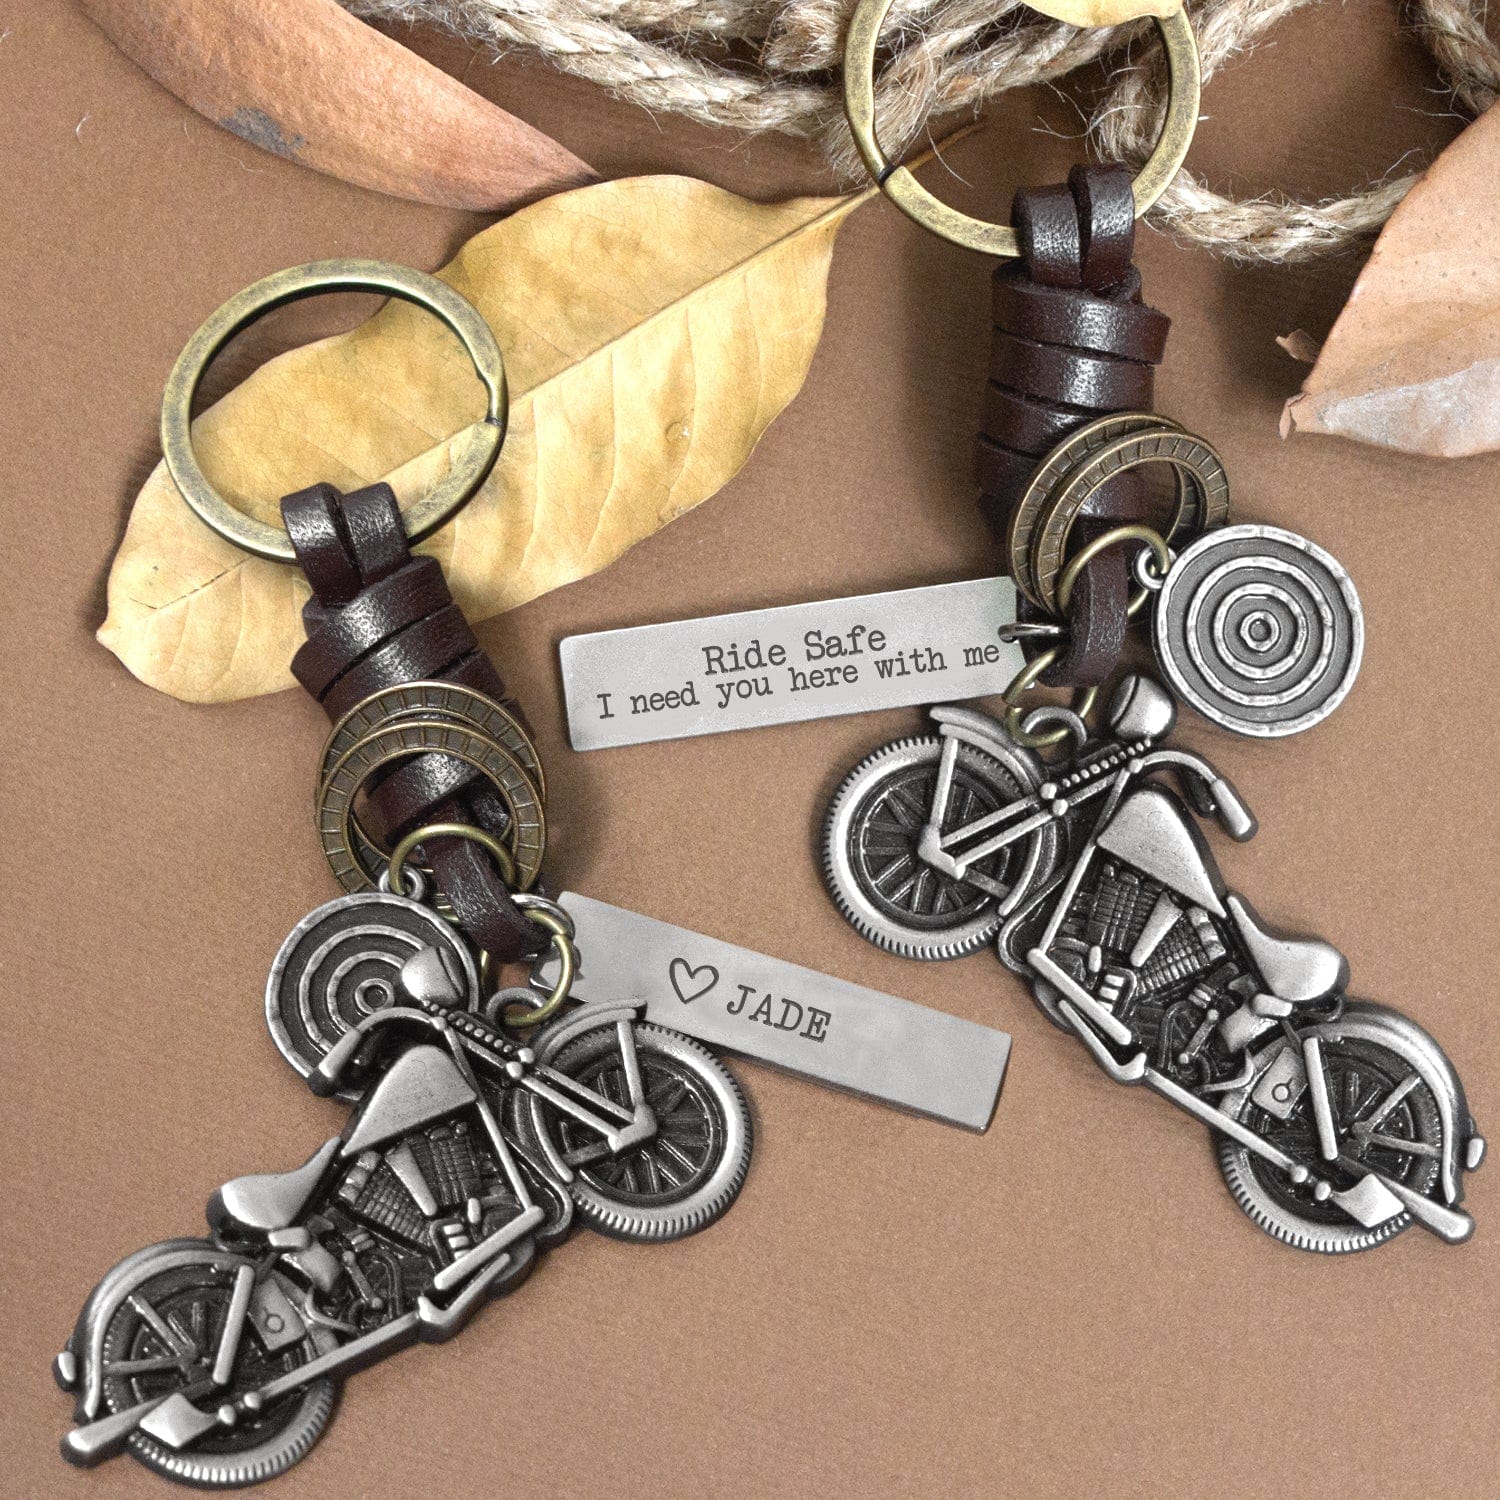 Personalized Motorcycle Keychain - To My Man - Ride Safe, I Need You Here With Me - Gkx26014